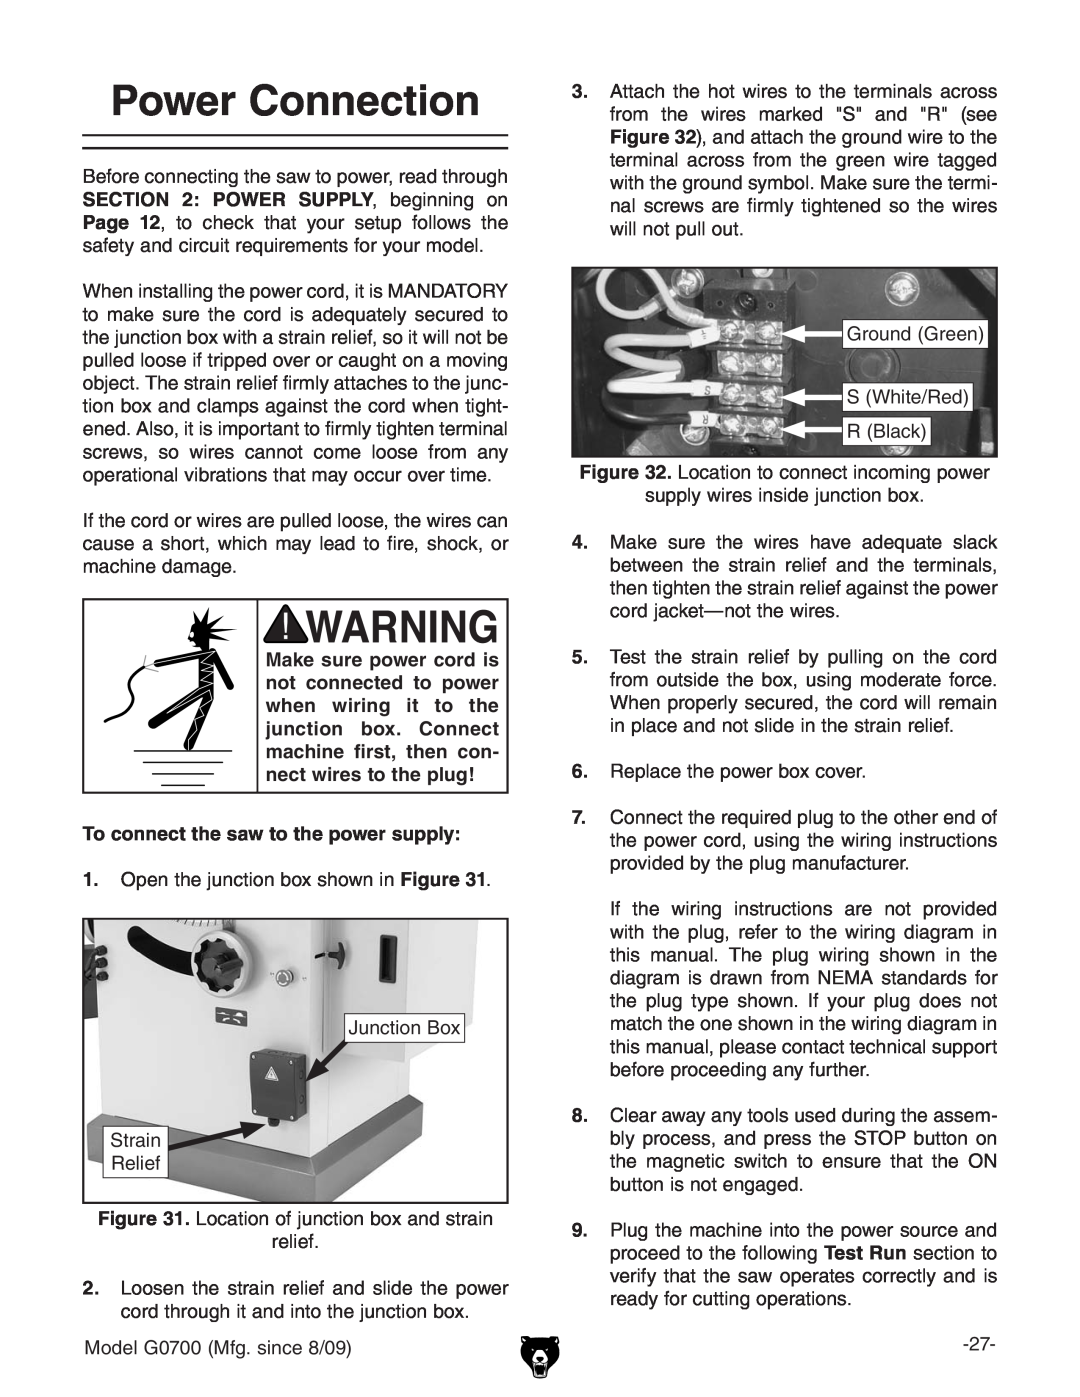 Grizzly G0700 owner manual Power Connection, To connect the saw to the power supply 